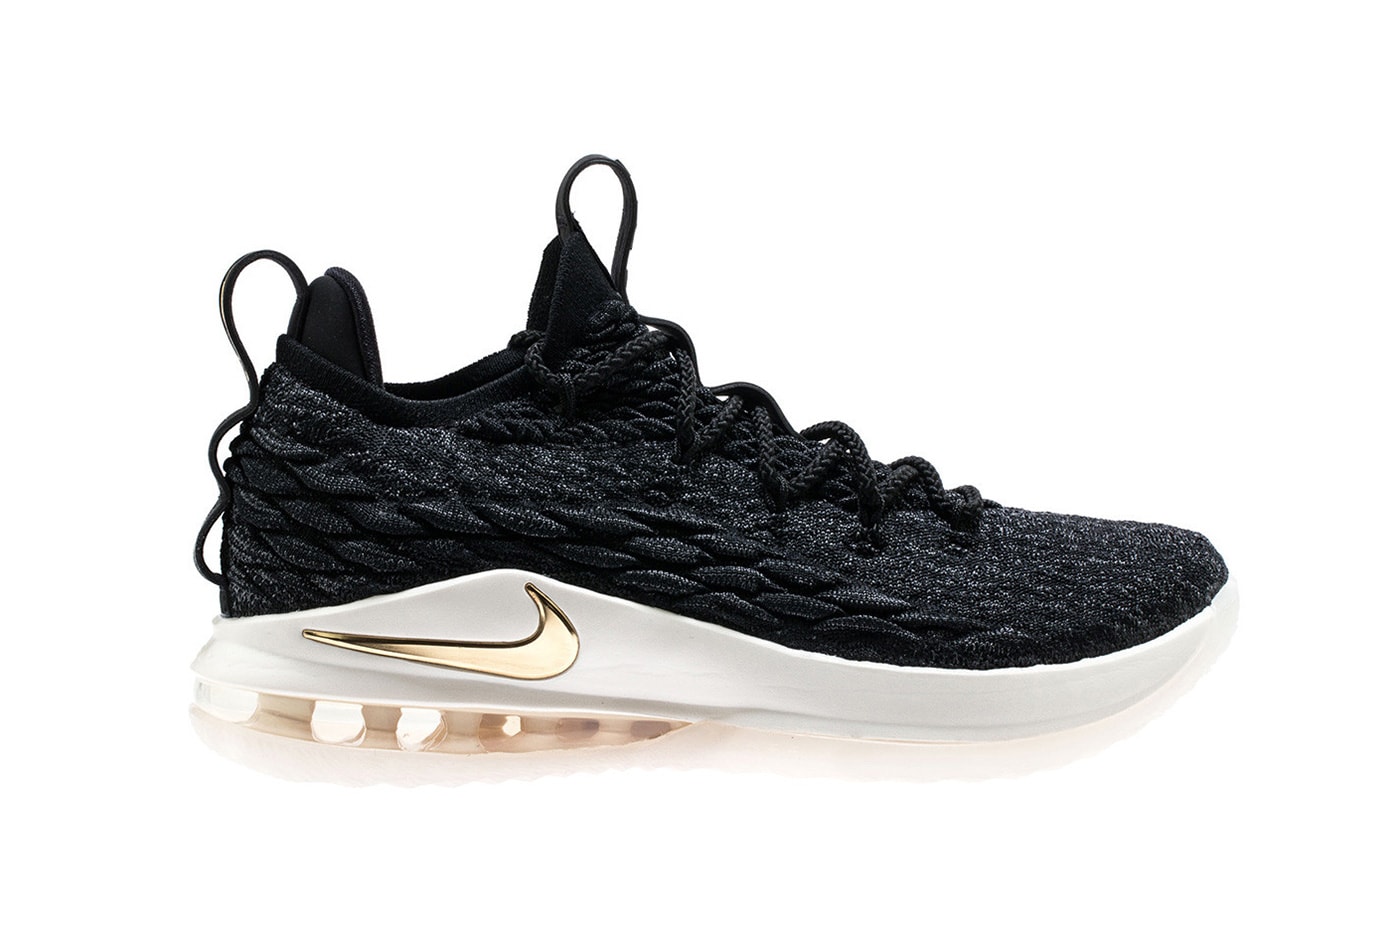 Nike LeBron 15 Low black gold may 2018 lebron james nike basketball may release date info drop sneakers shoes footwear